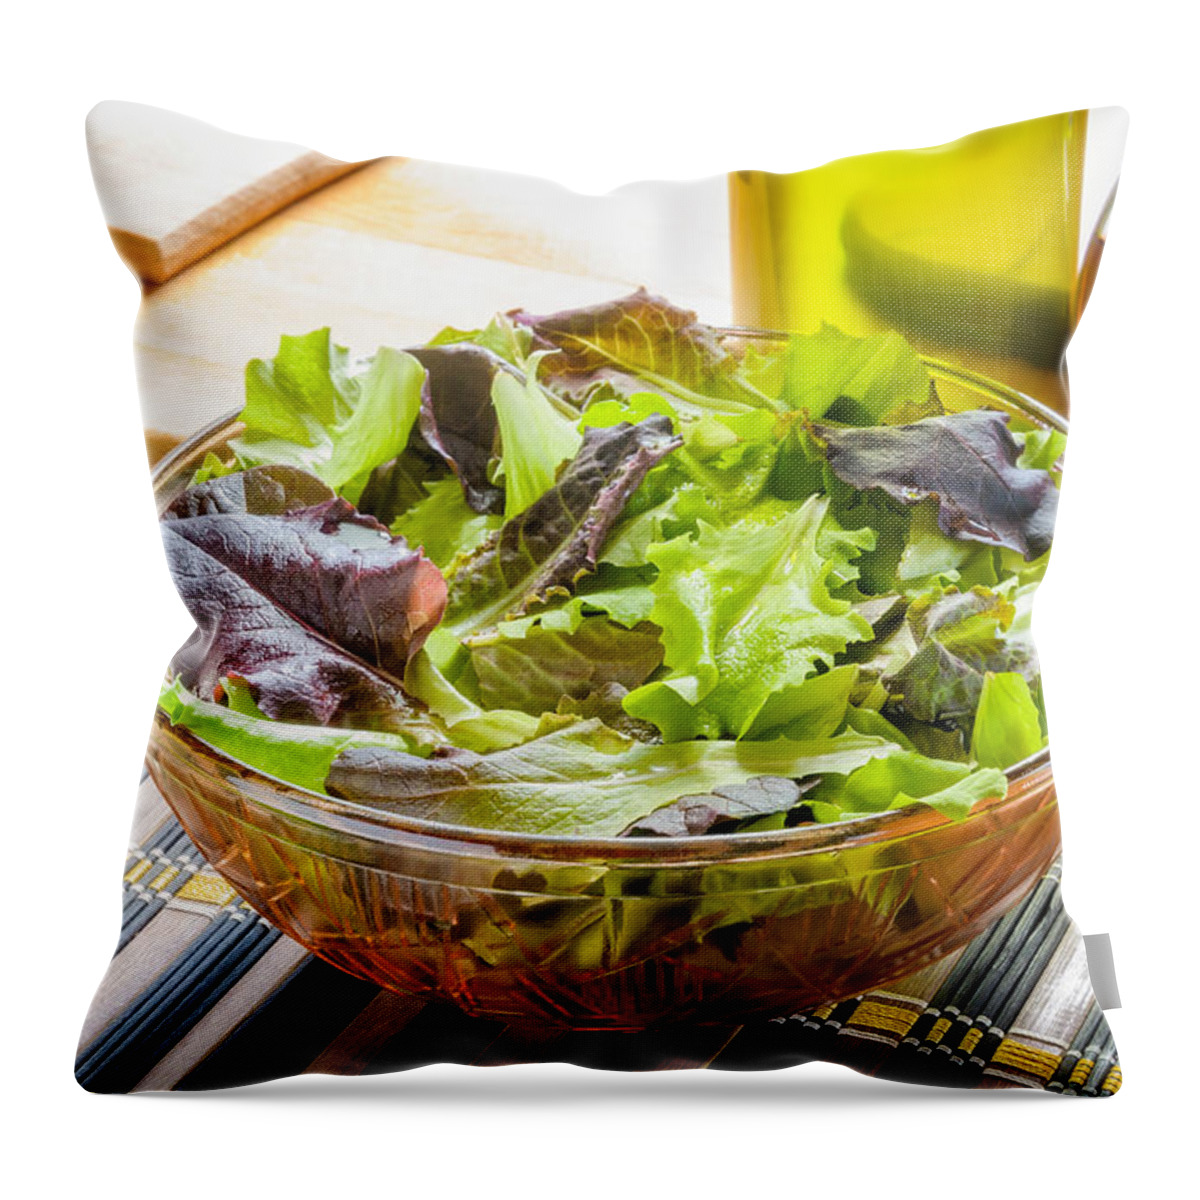 Olive Oil Throw Pillow featuring the photograph Mixed Salad with Condiments by Alain De Maximy